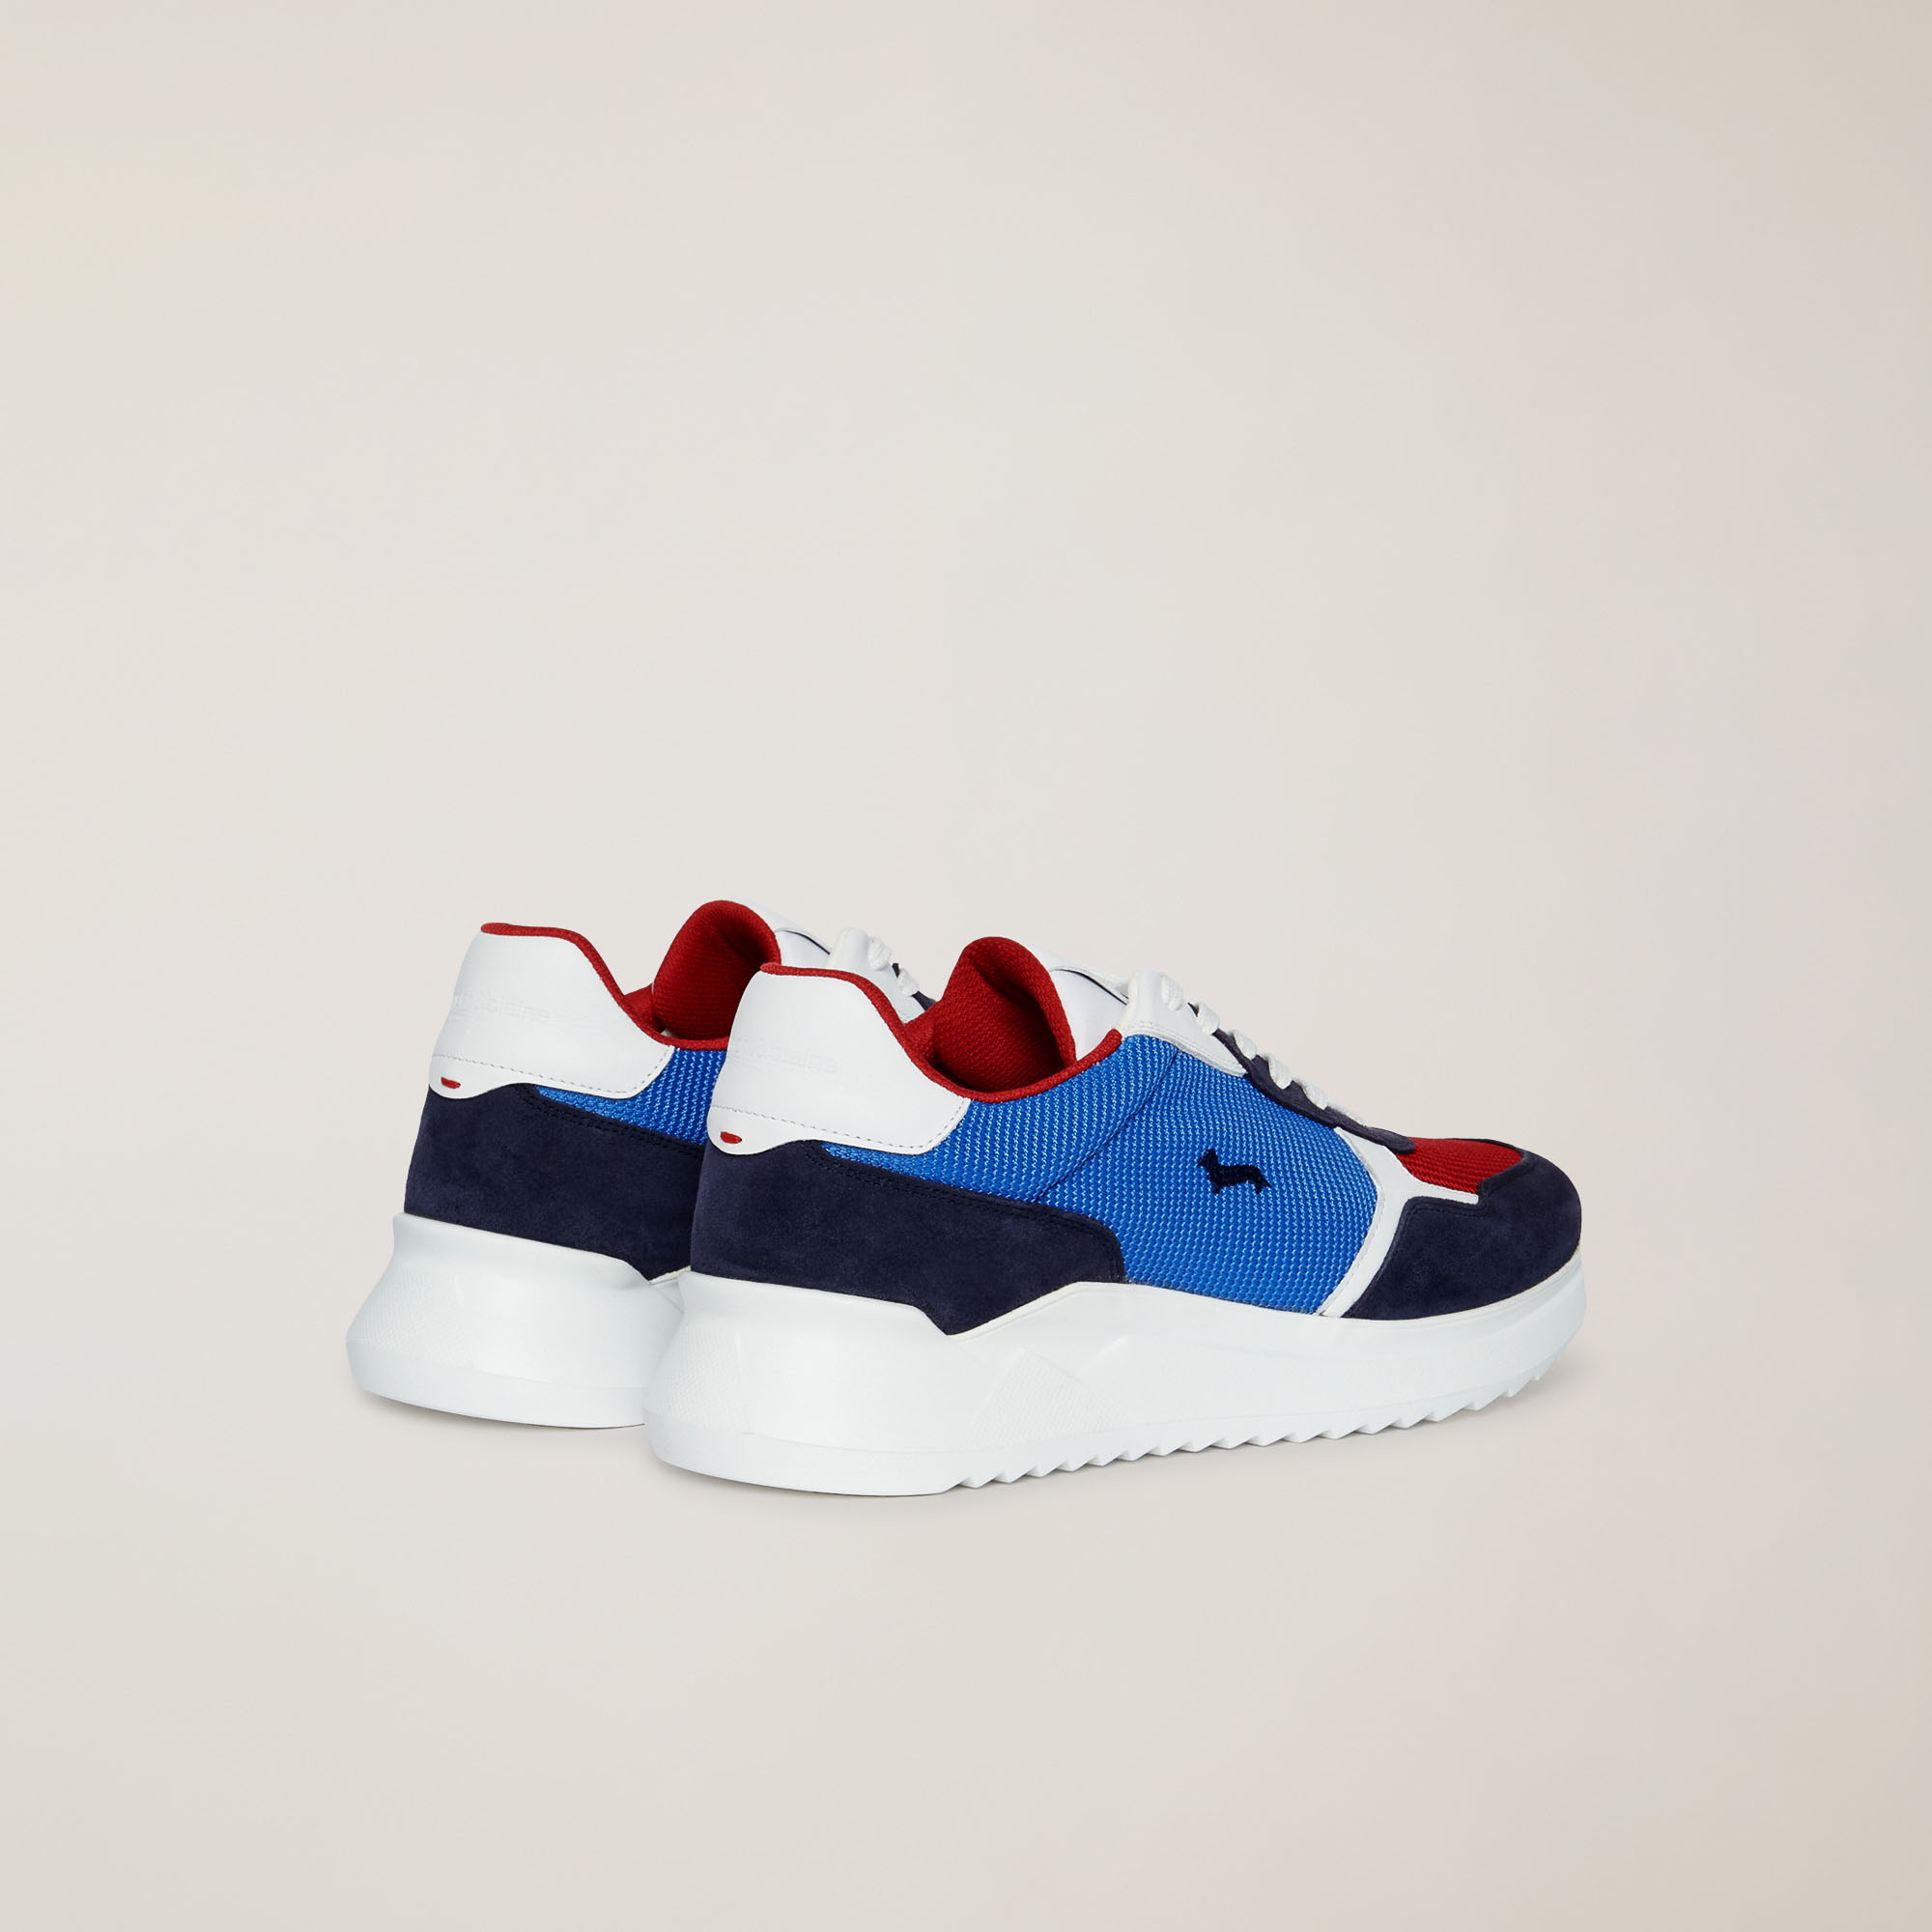 Mixed-Material Sneaker, Blue/Red, large image number 2